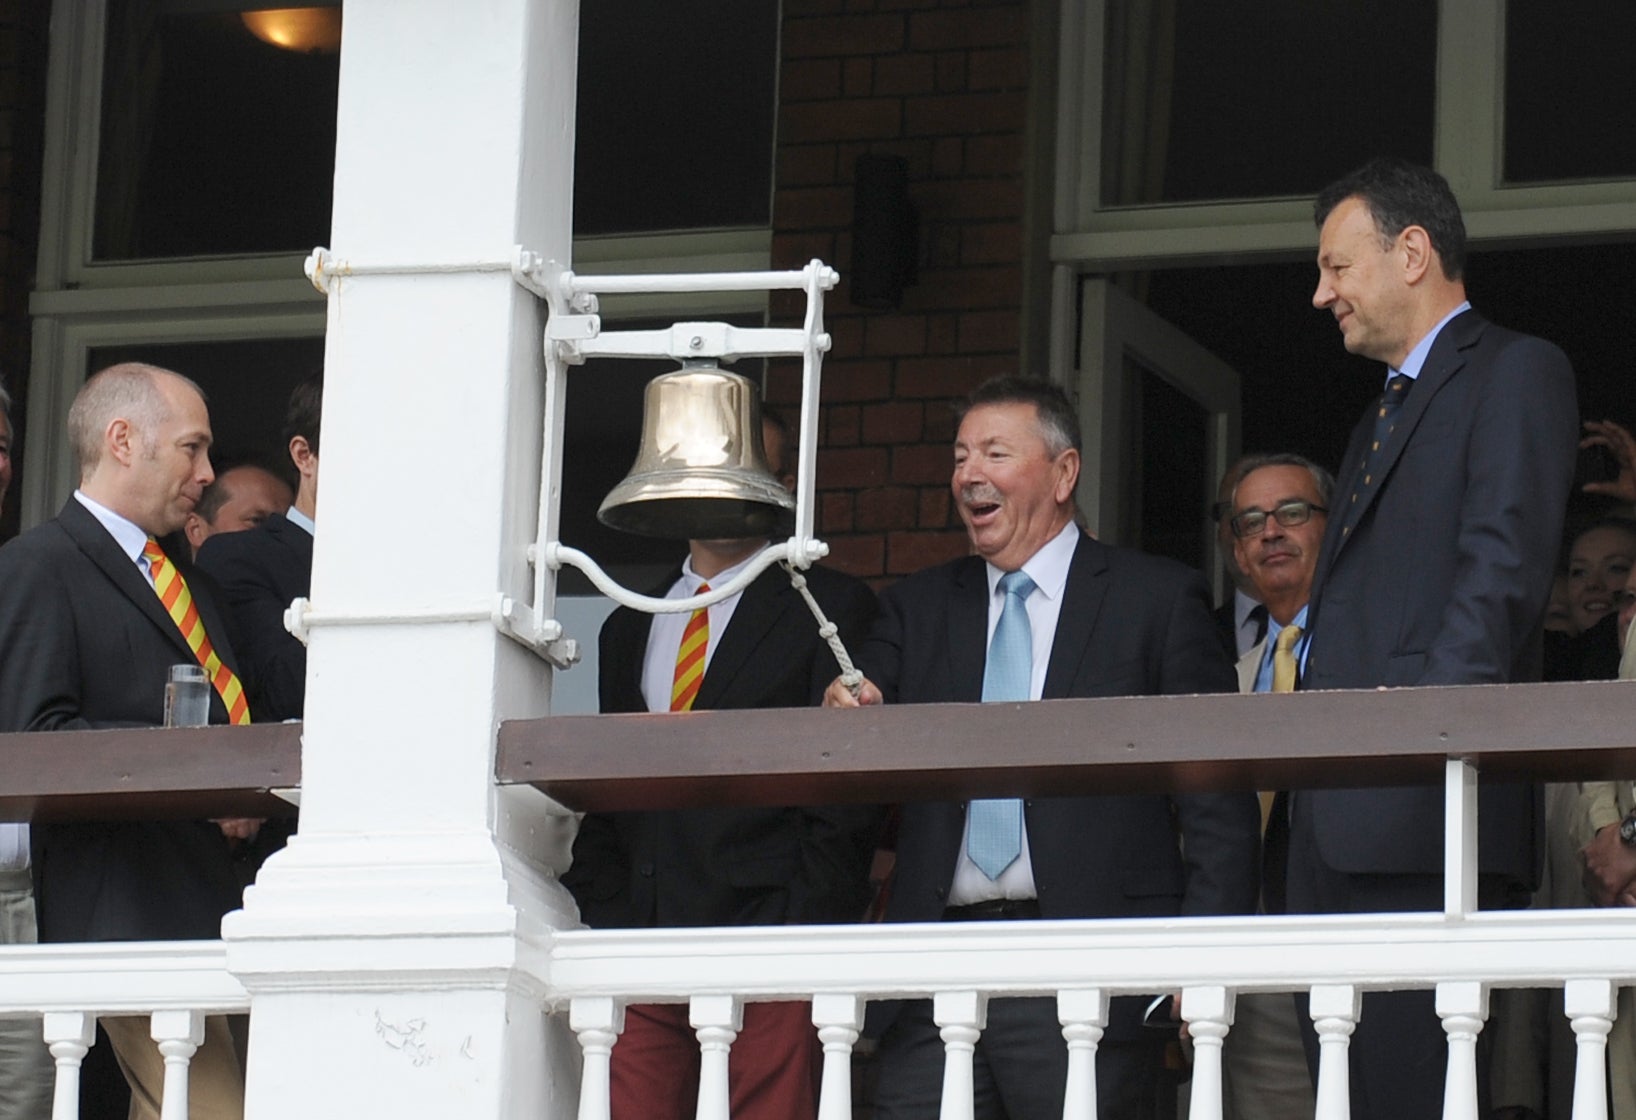 Marsh was afforded the honour of ringing the bell at Lords ahead of an Ashes Test (PA)